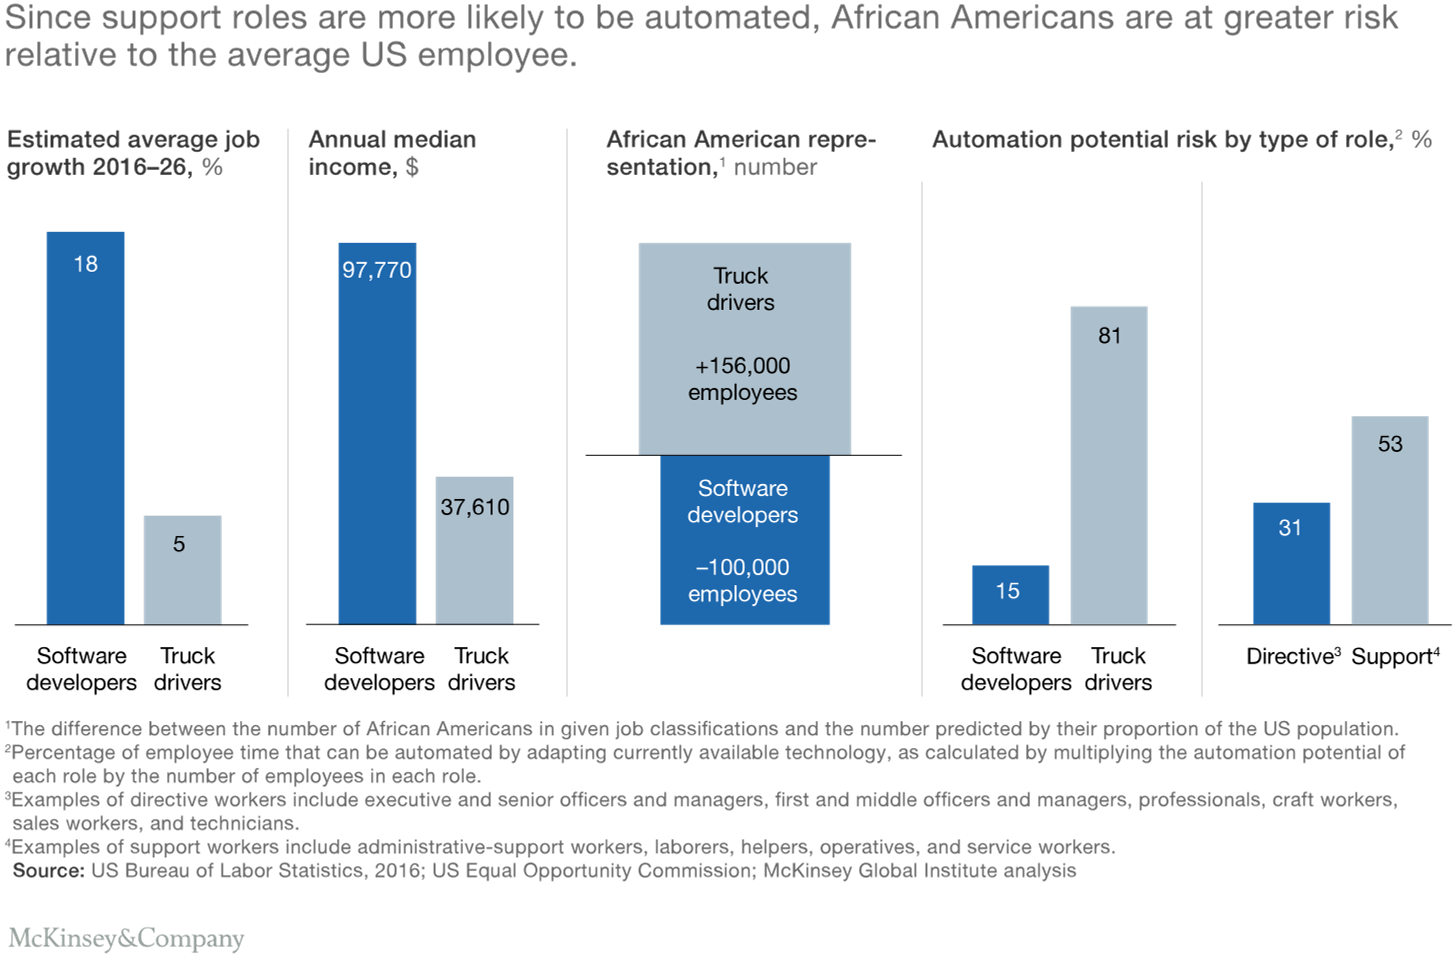 Since support roles are more likely to be automated, African Americans are at greater risk relative to the average US employee.